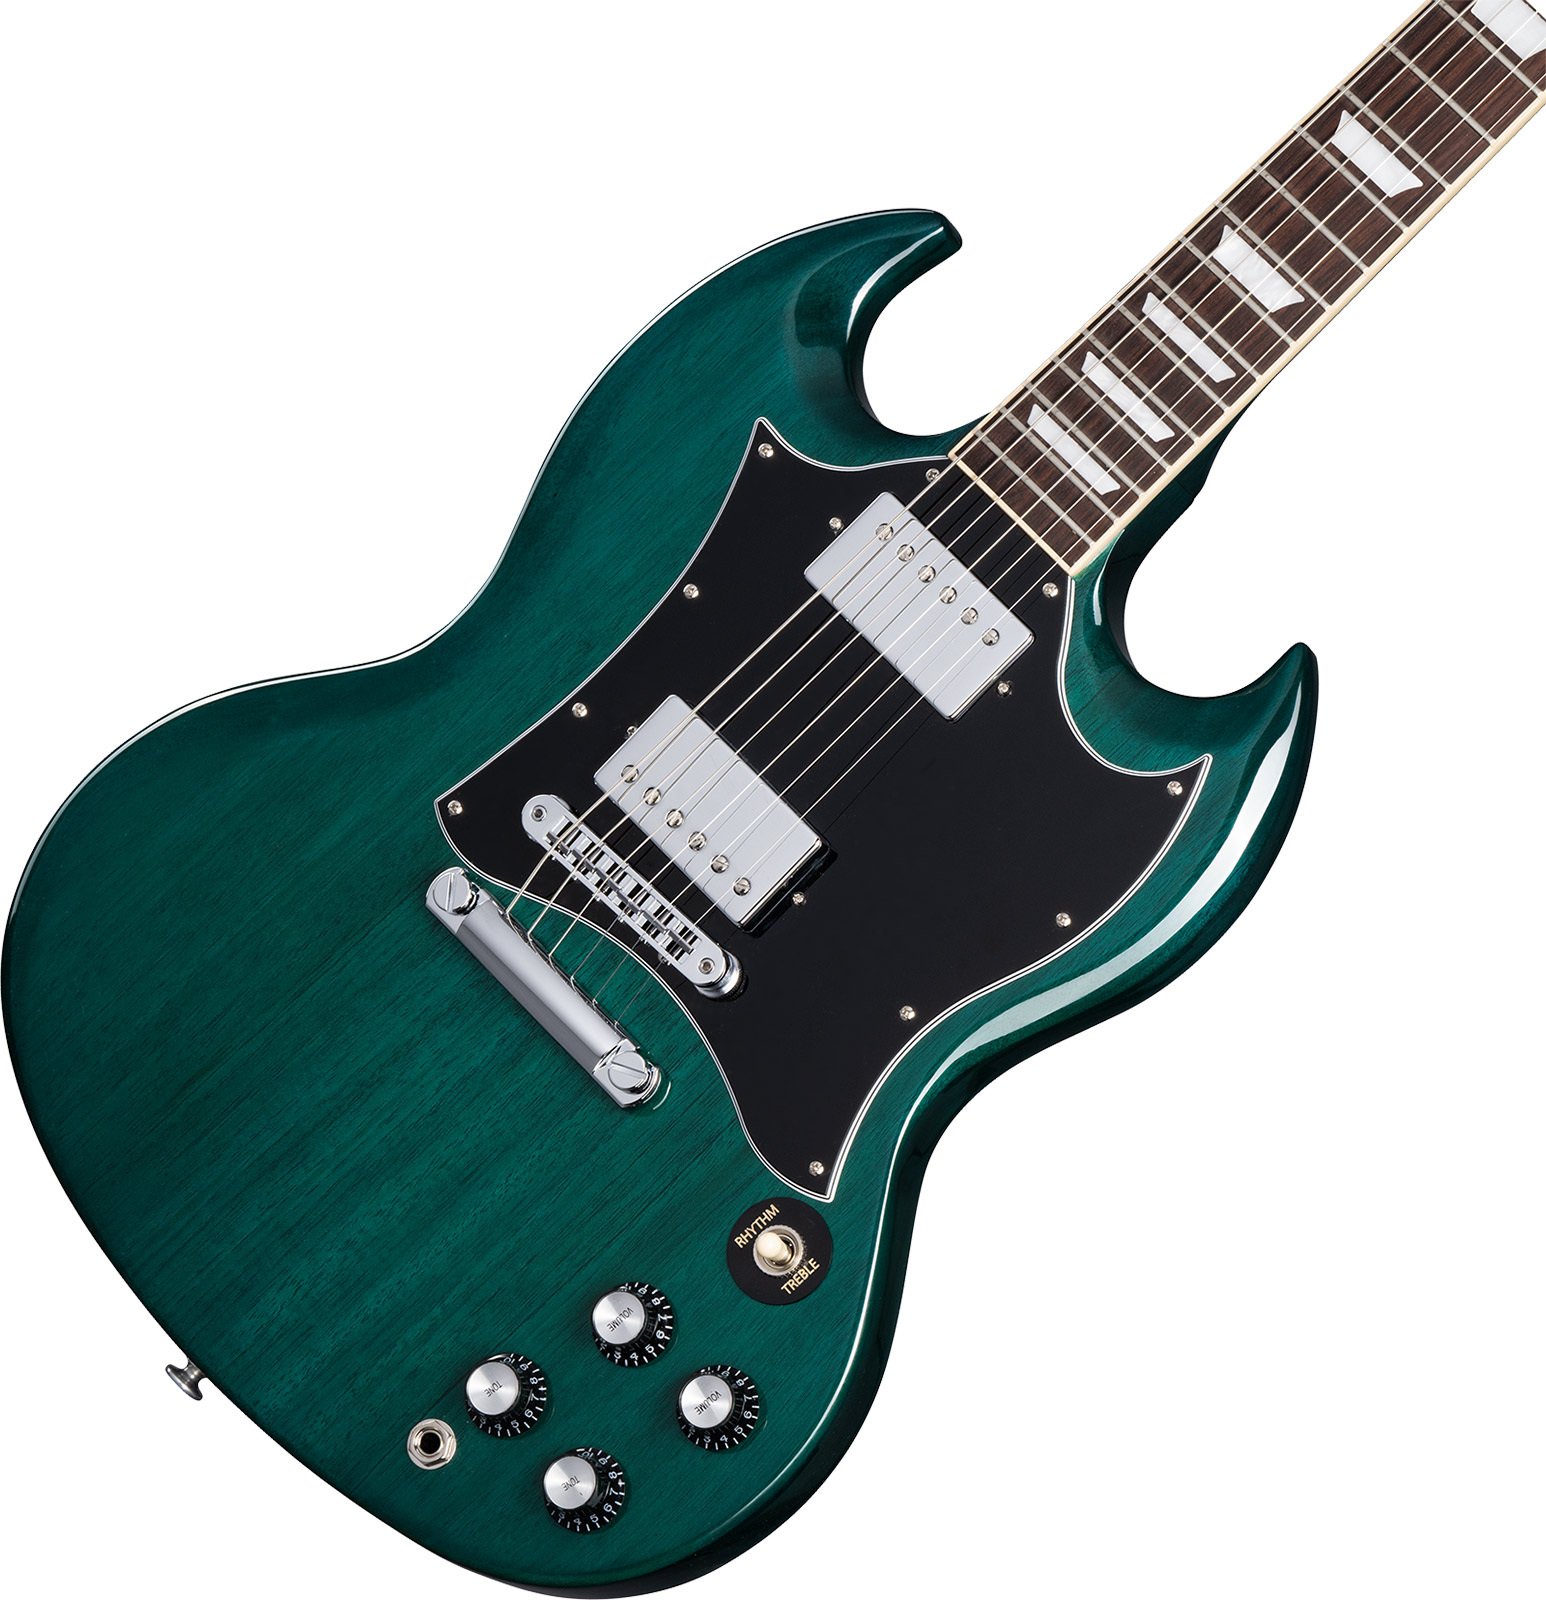 Gibson Sg Standard Custom Color 2h Ht Rw - Translucent Teal - Double cut electric guitar - Variation 3